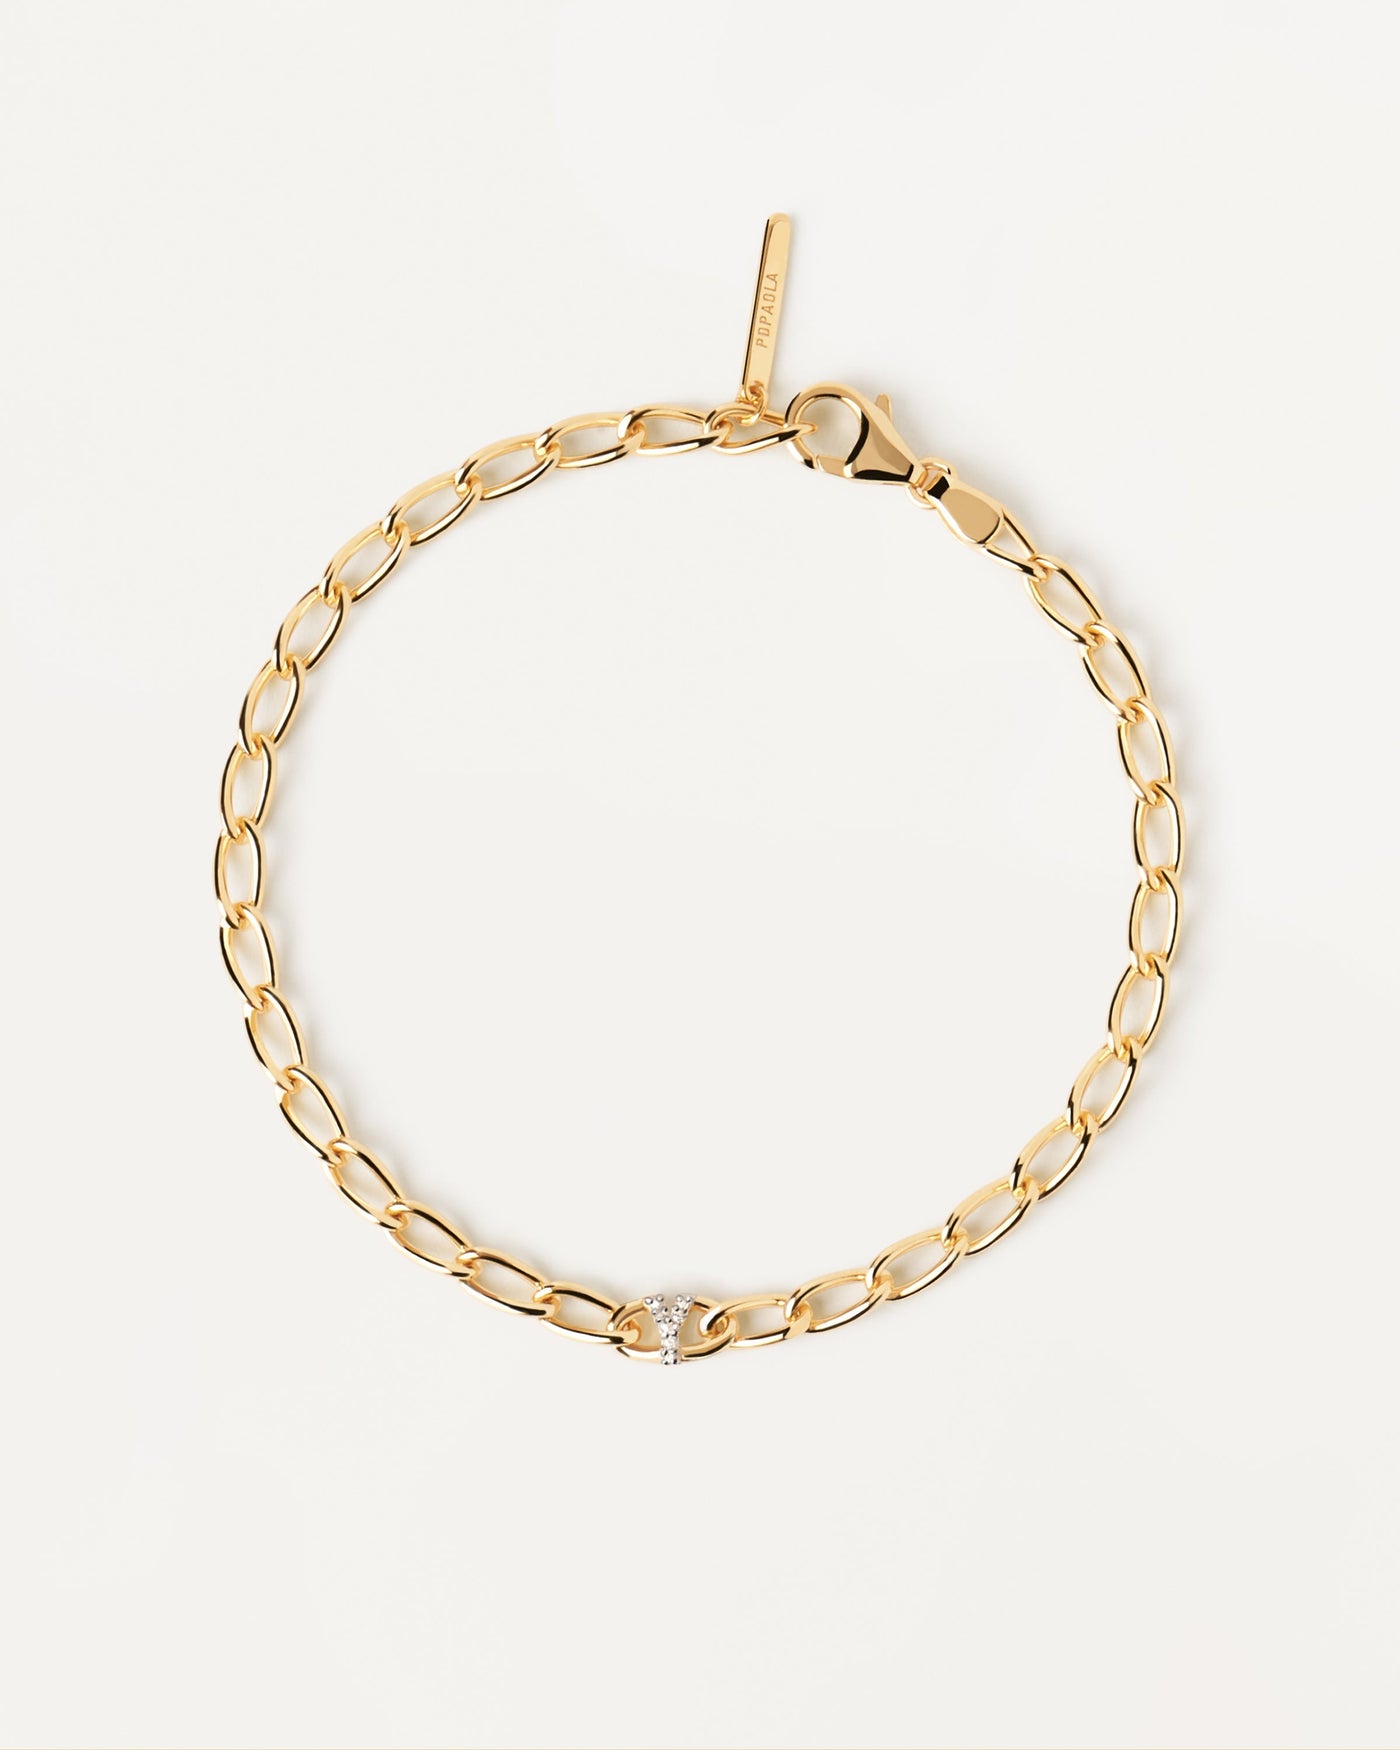 2023 Selection | Letter Y Chain Bracelet. cable chain bracelet in gold-plated silver with initial Y in zirconia. Get the latest arrival from PDPAOLA. Place your order safely and get this Best Seller. Free Shipping.